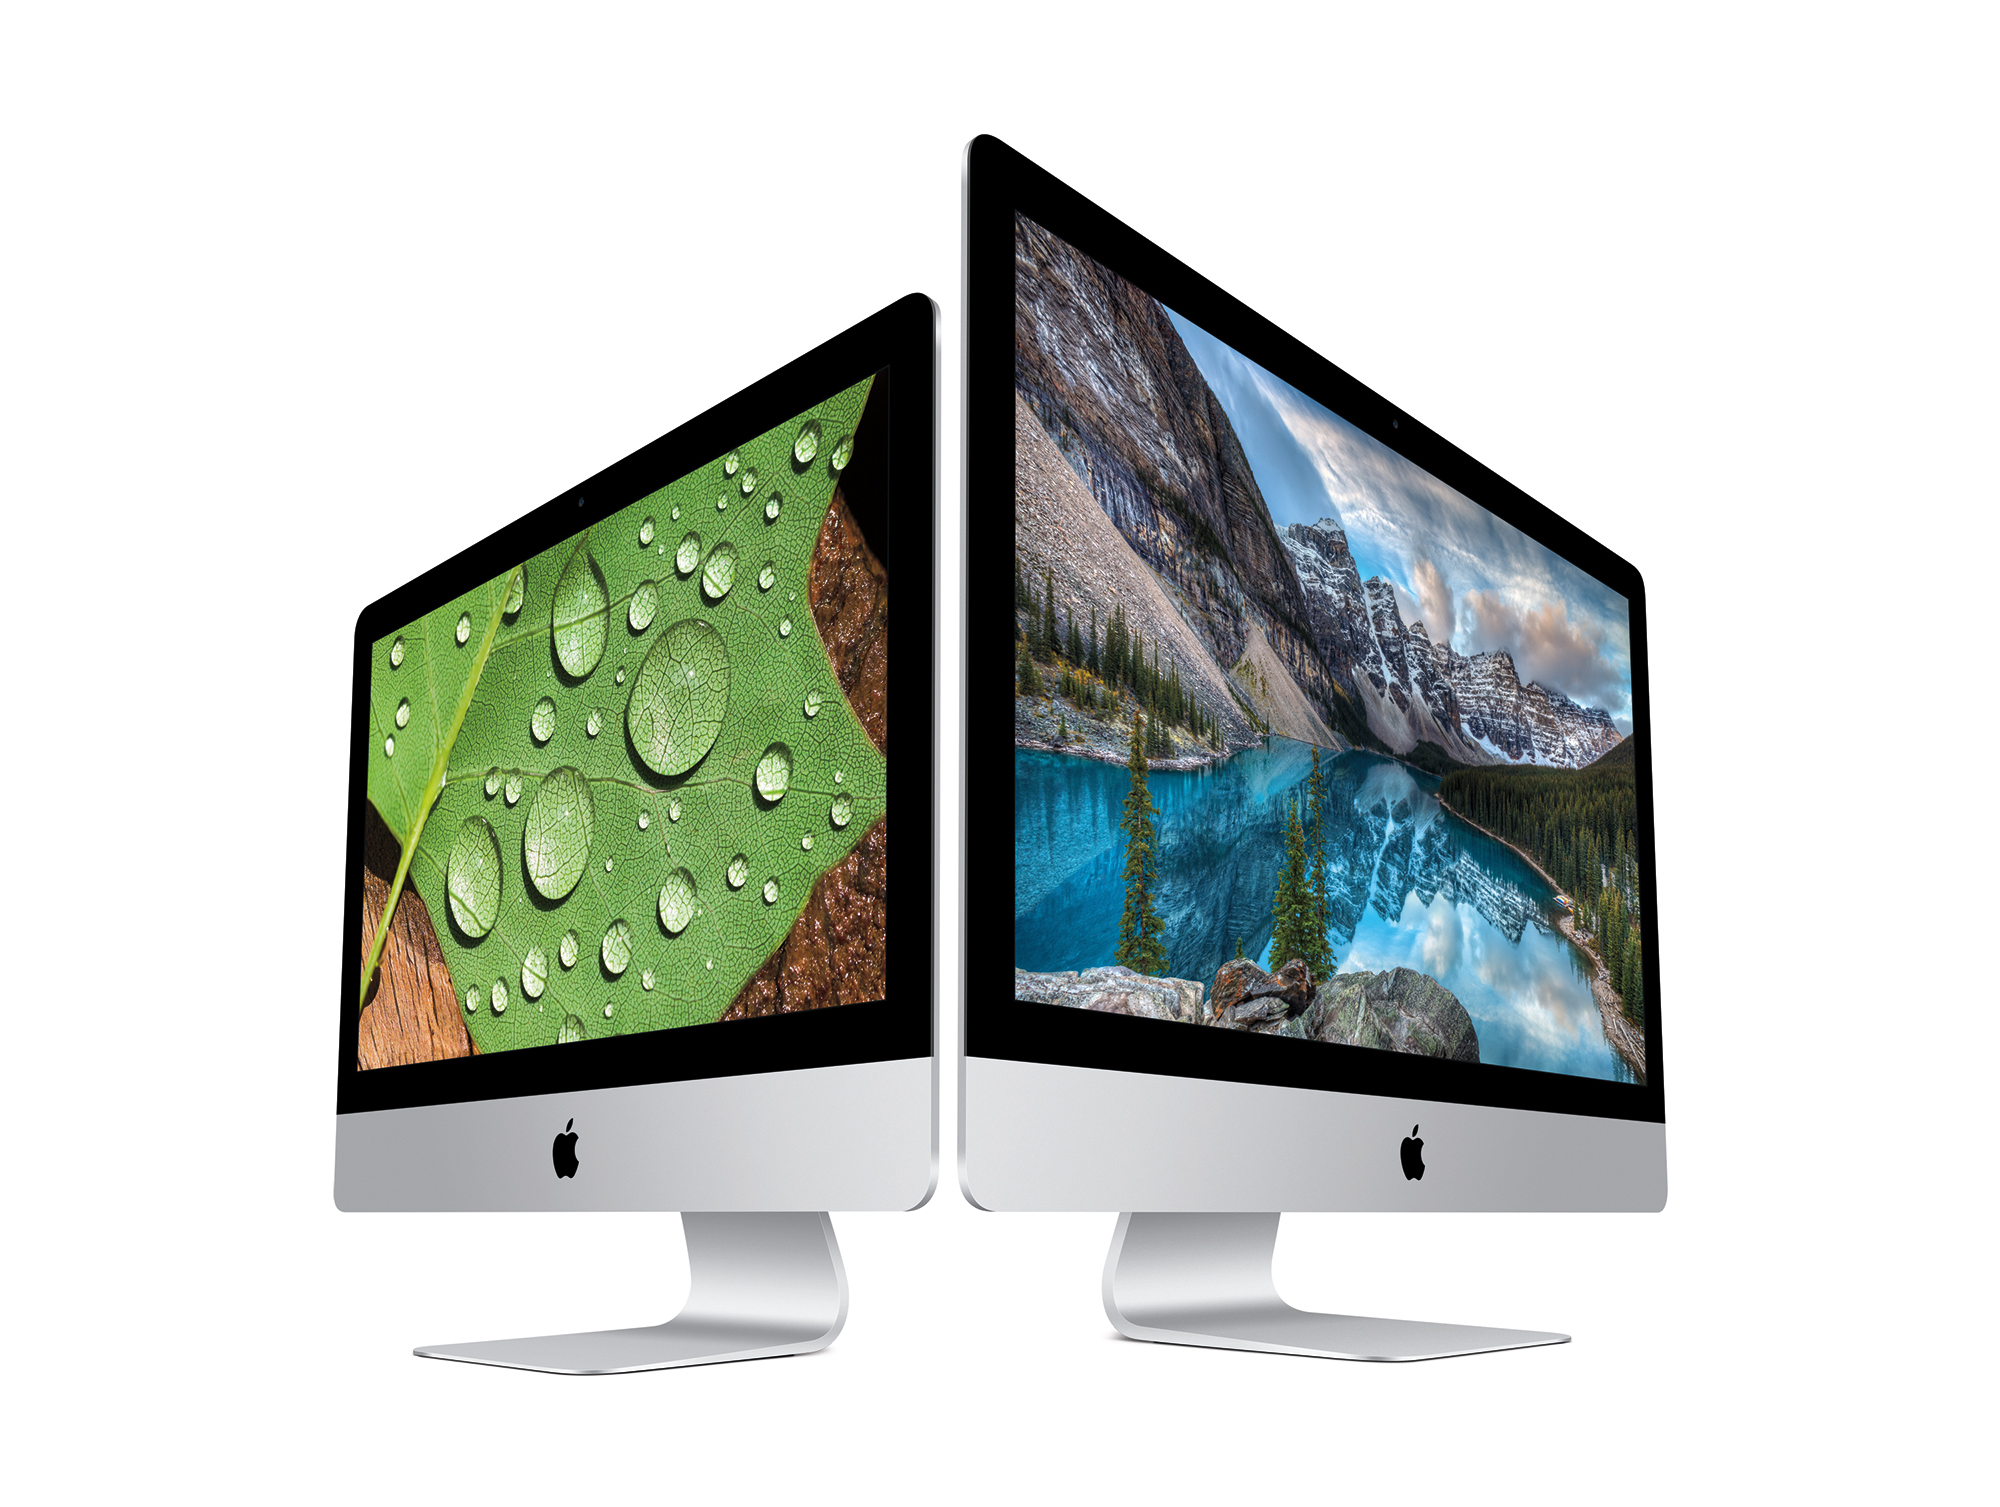 SLR Lounge's Test Shows Mac Underpowered VS PC, But I'm Still Not Going PC